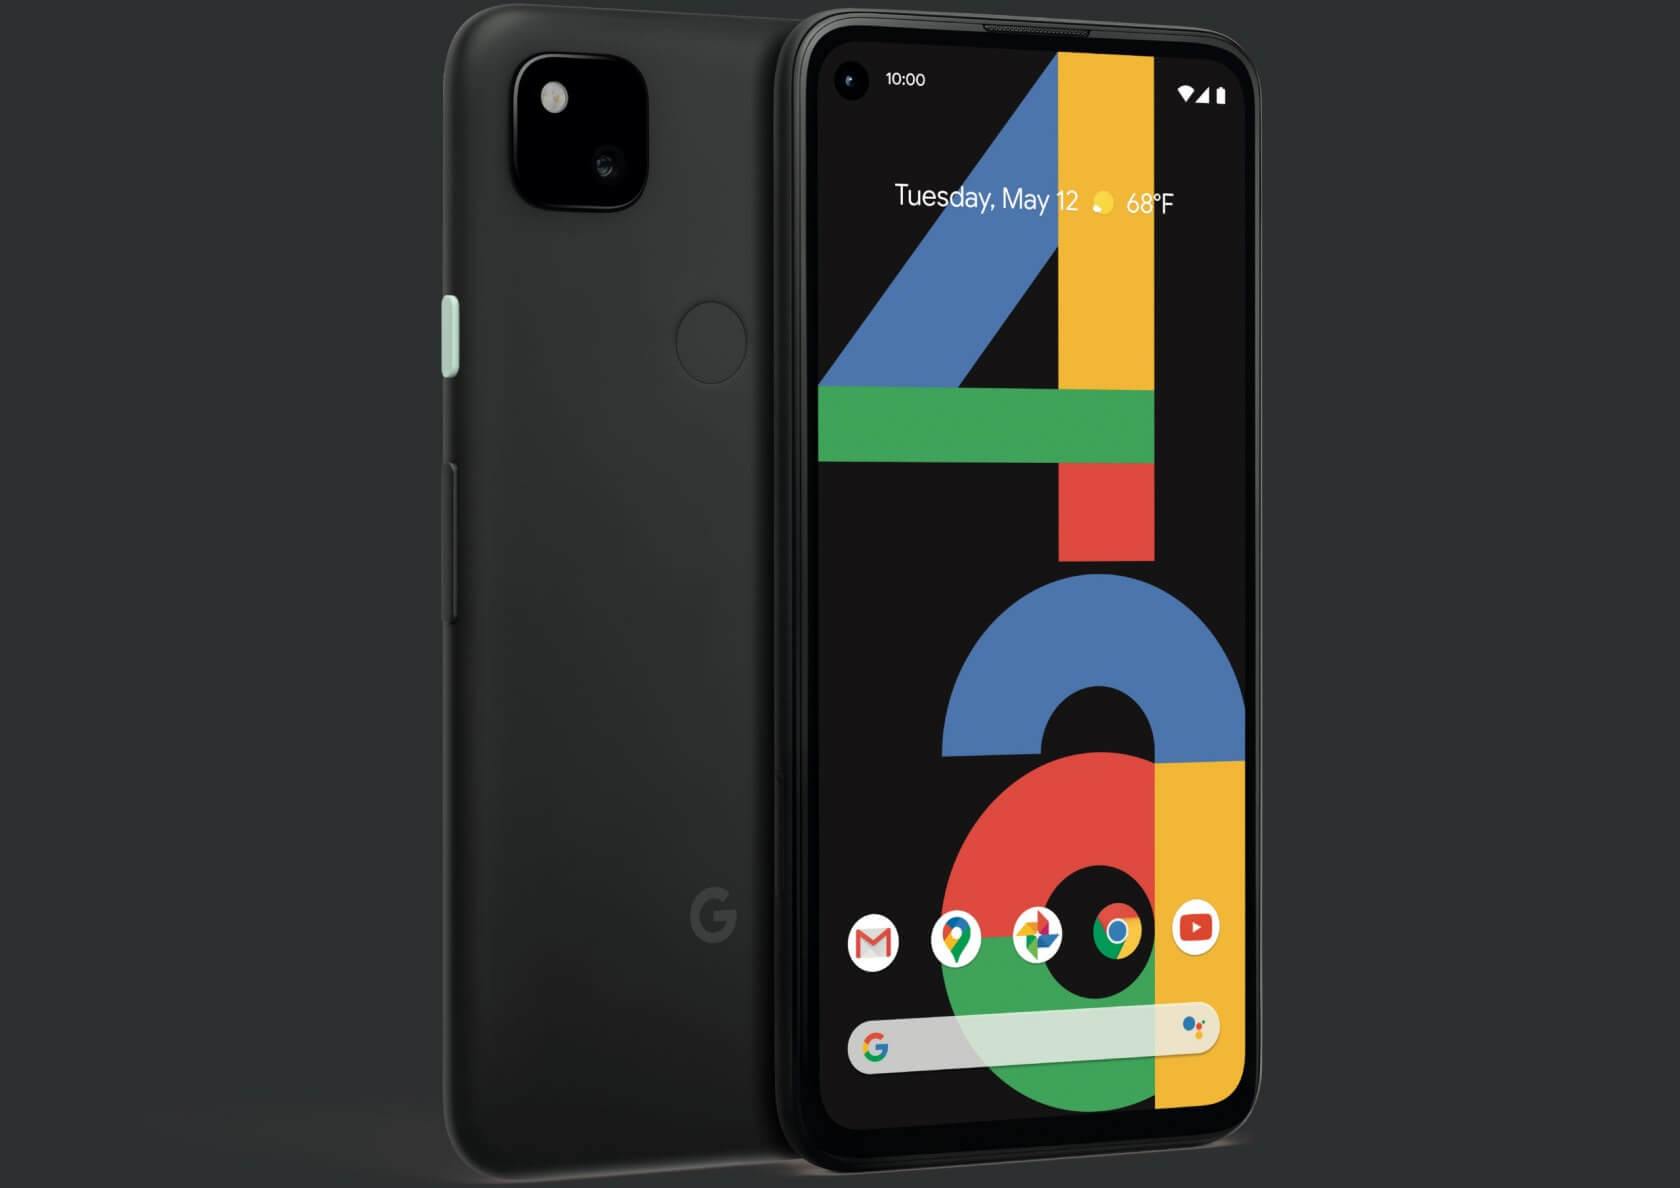 Google Pixel 4a starts at $349, Pixel 4a 5G and Pixel 5 are coming later this year